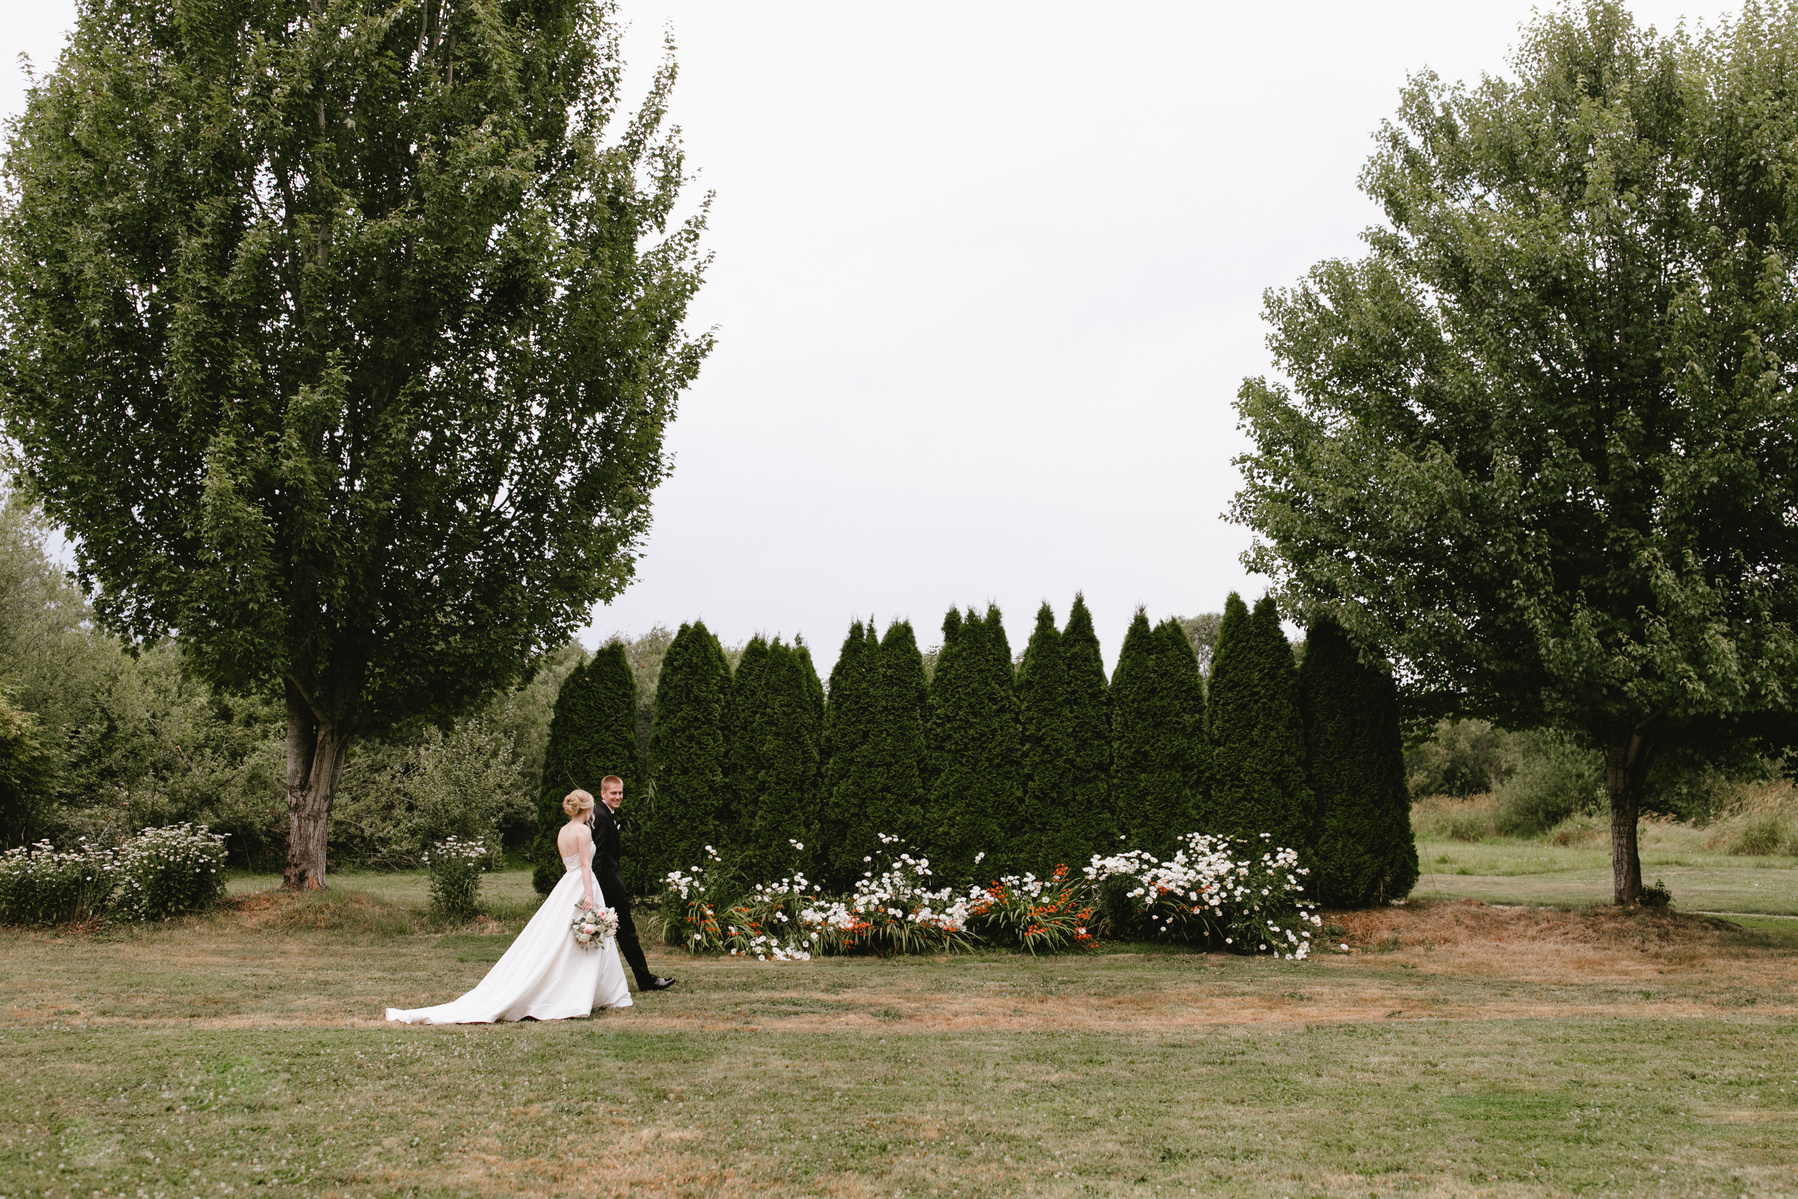 Washington bride and groom walking in her sweetheart wedding dress and his black tux toward a garden wedding of white roses